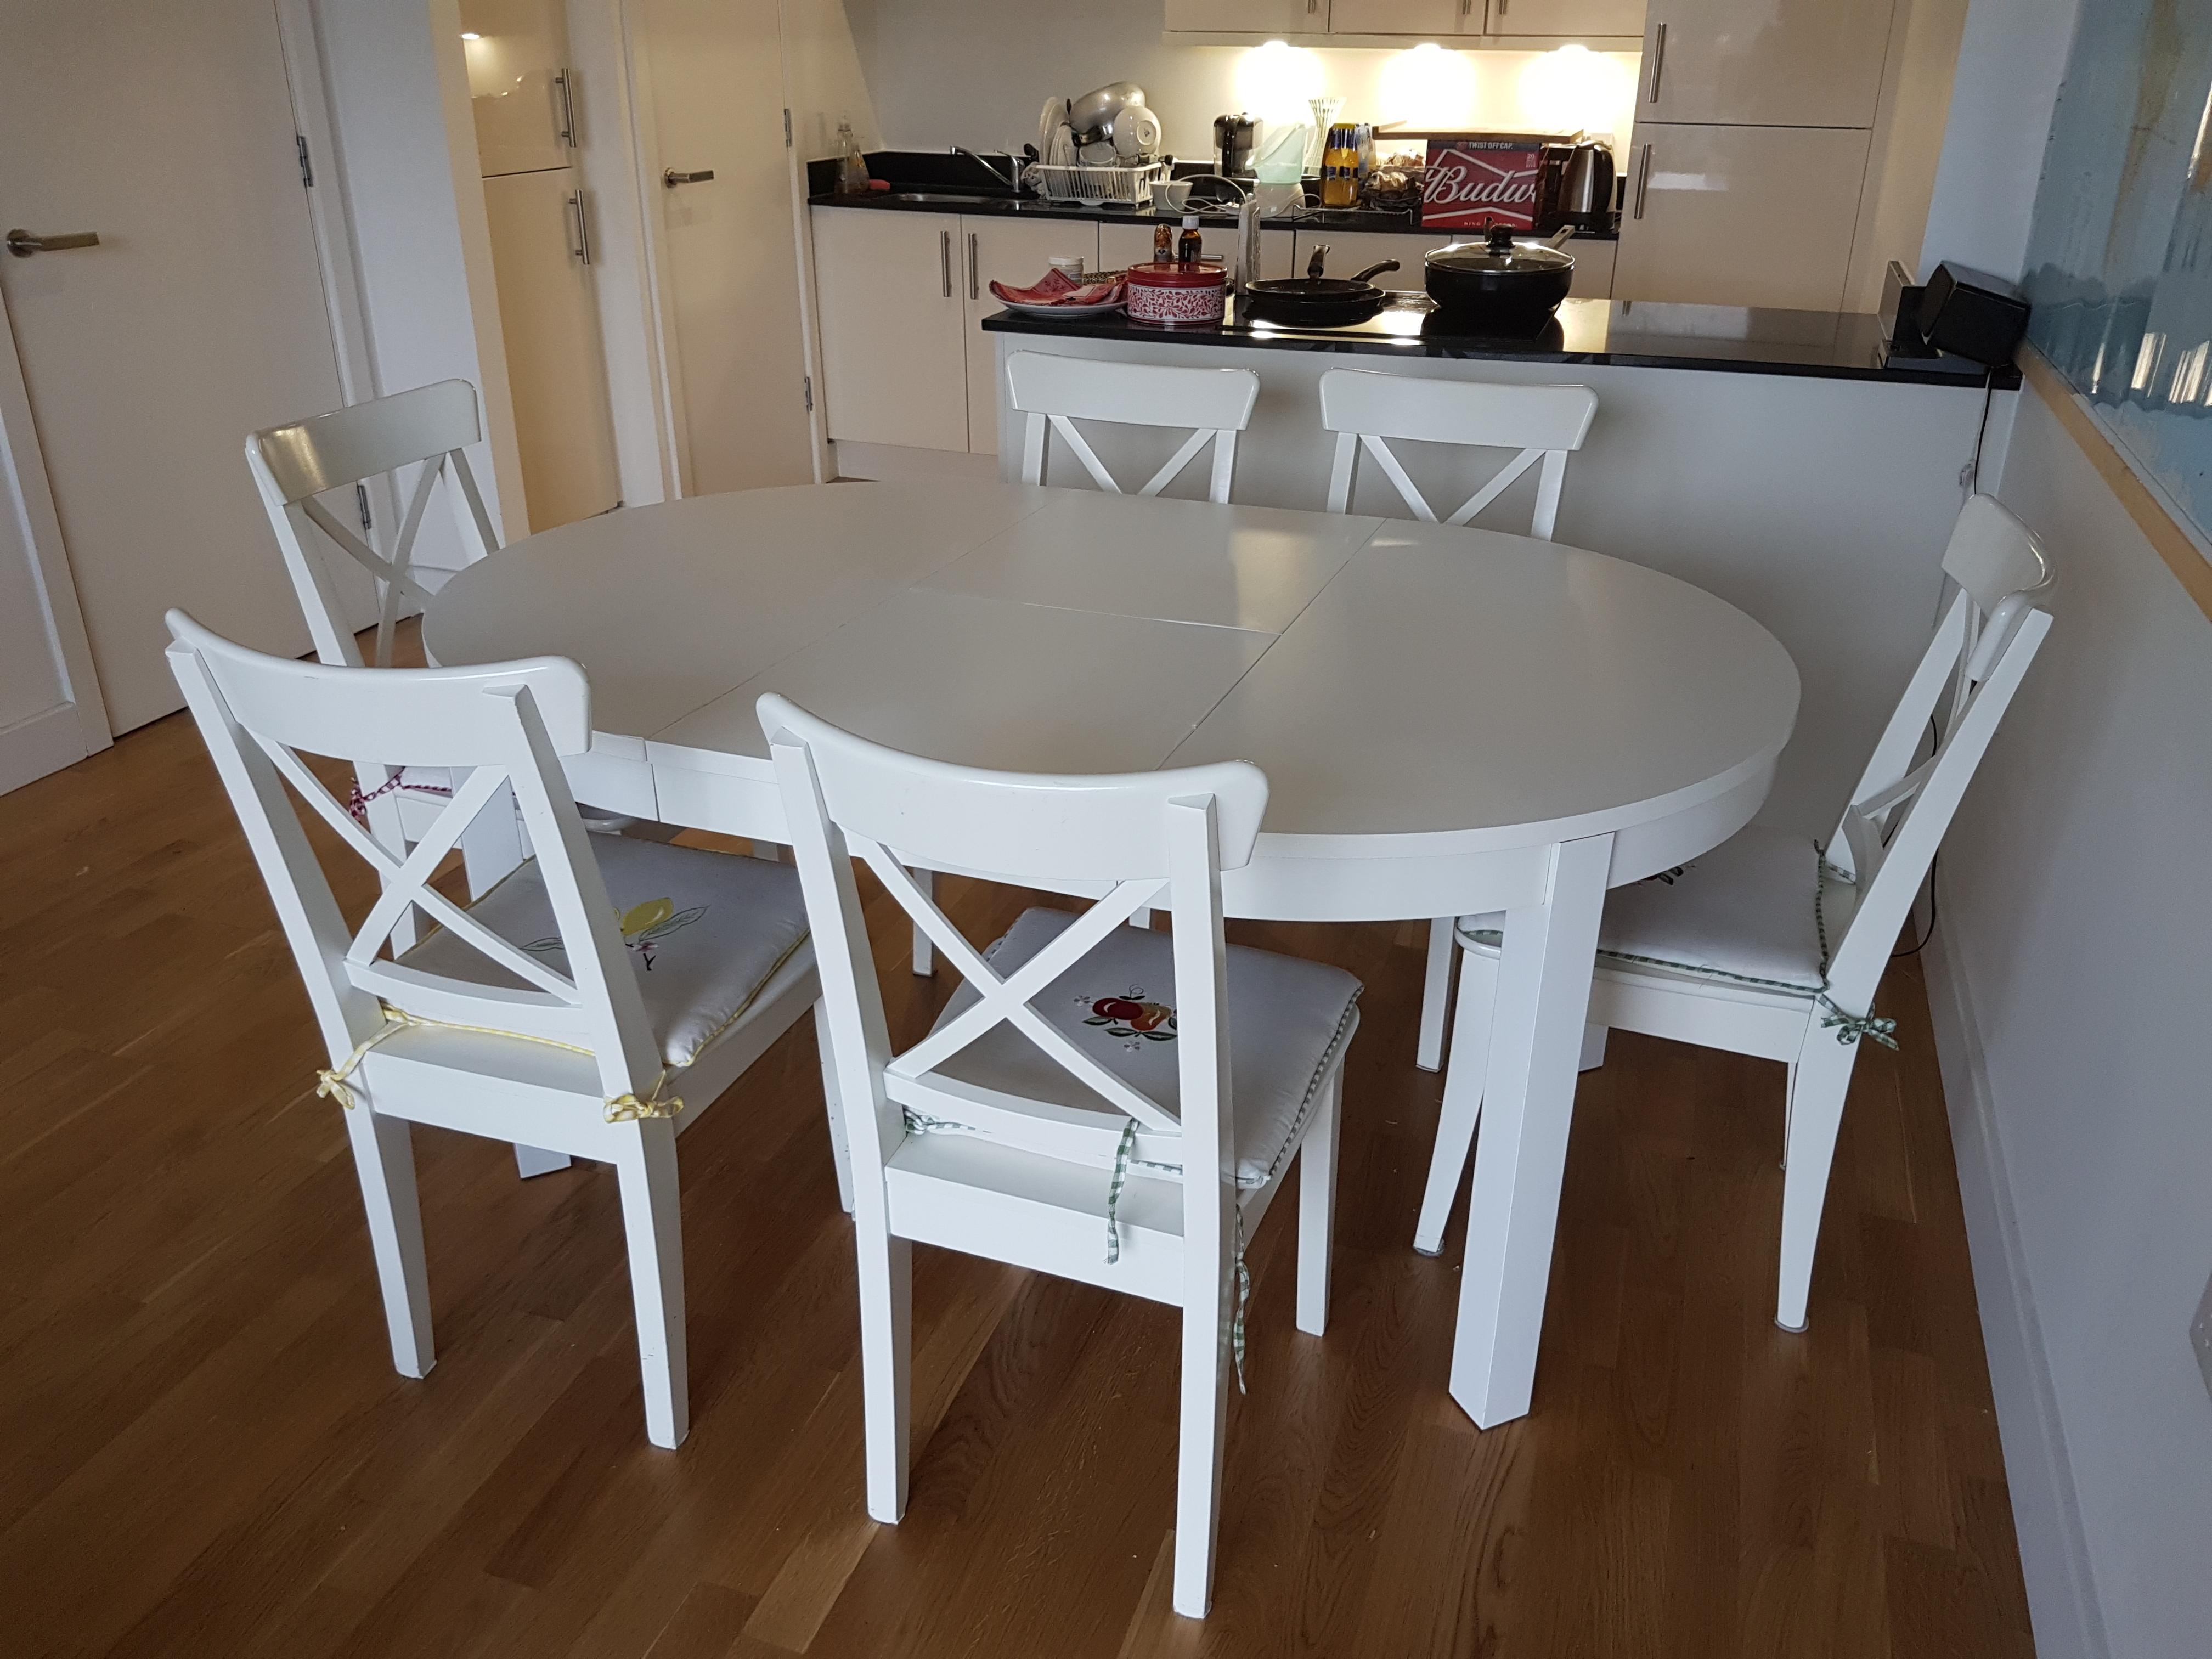 Extendable Dining Table Round Ikea Bjursta In Nw9 London For 99 00 For Sale Shpock